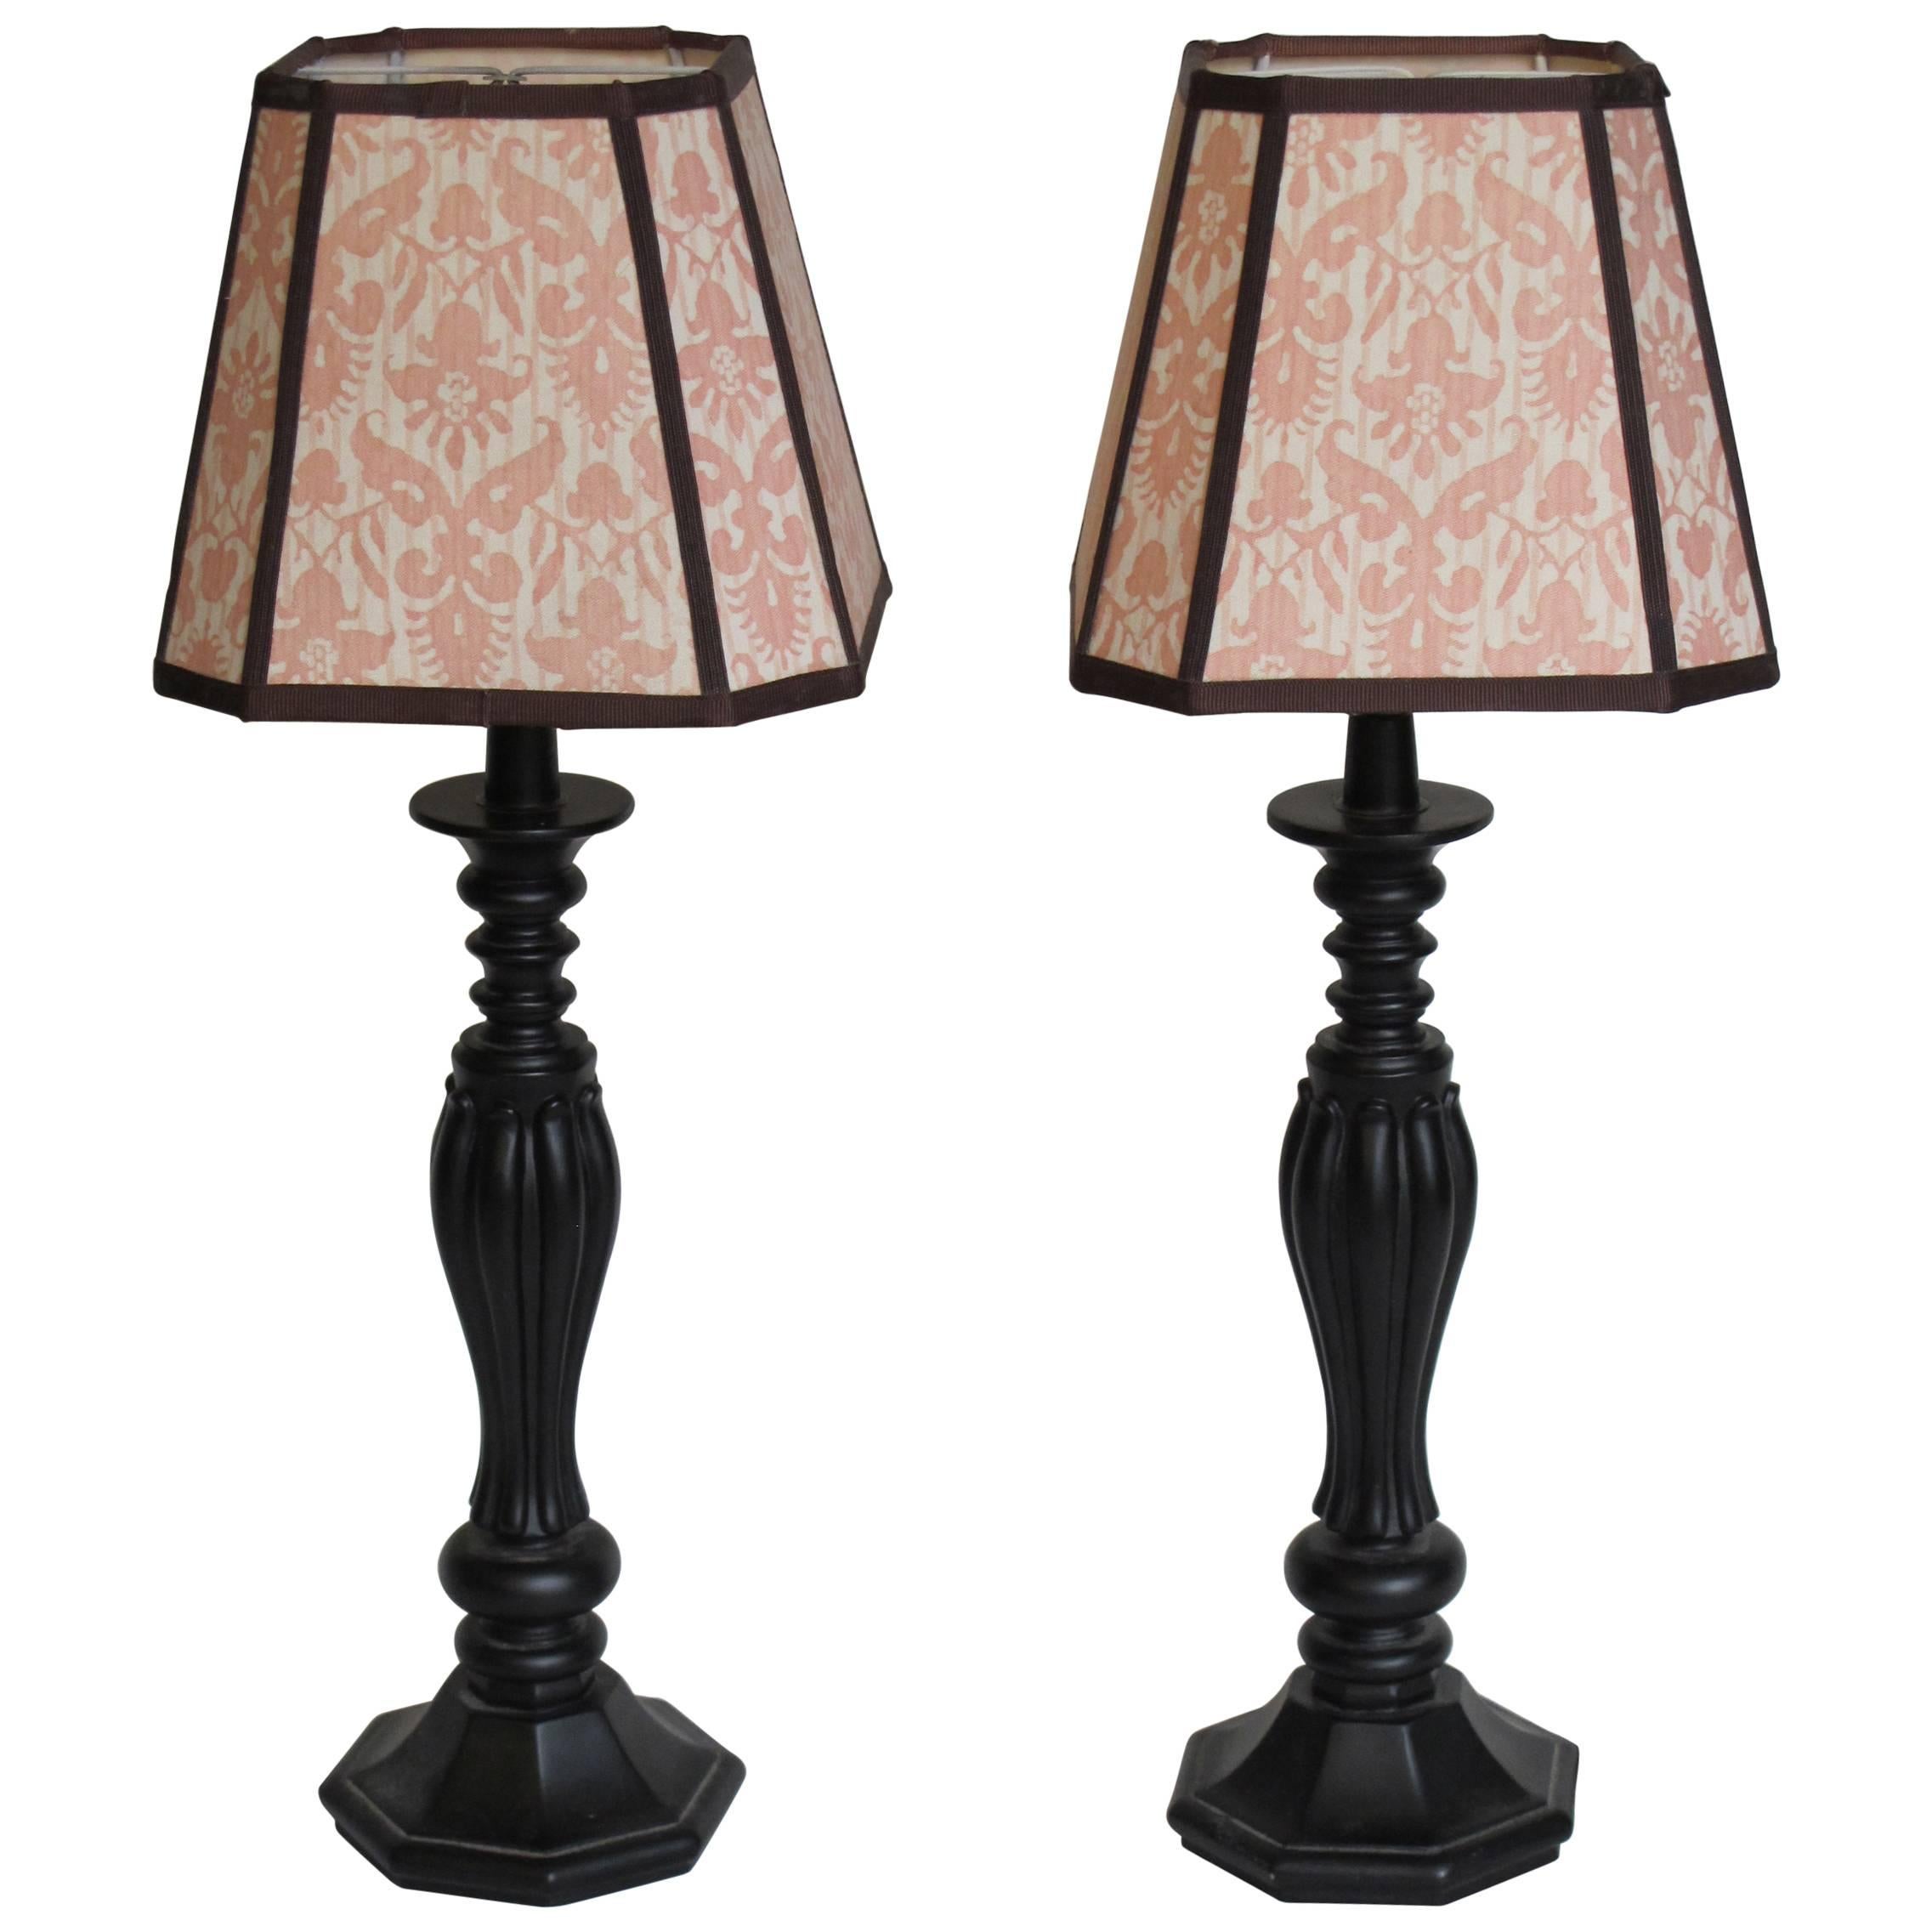 Pair of Lovely Lamps with Handmade Fortuny Shades by Mary Jane McCarty